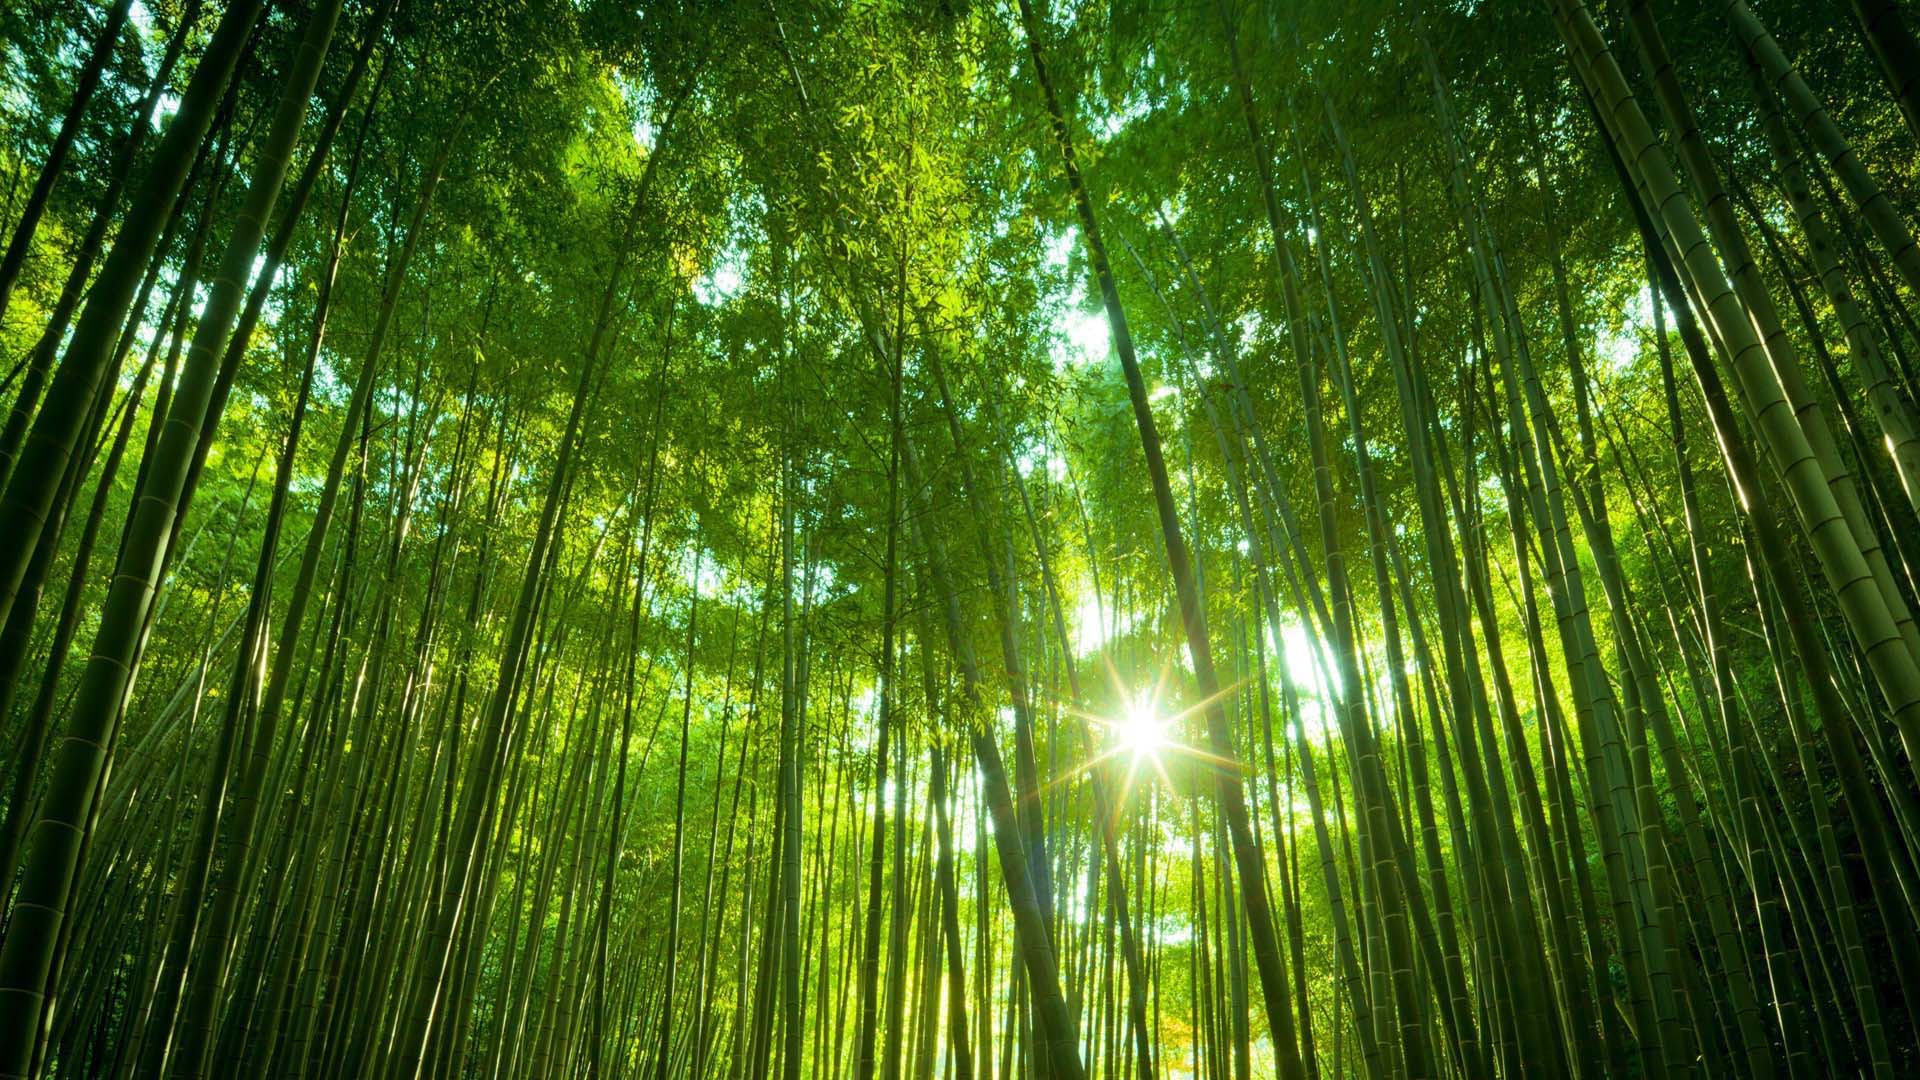 Bamboo Forest Wallpaper Pictures